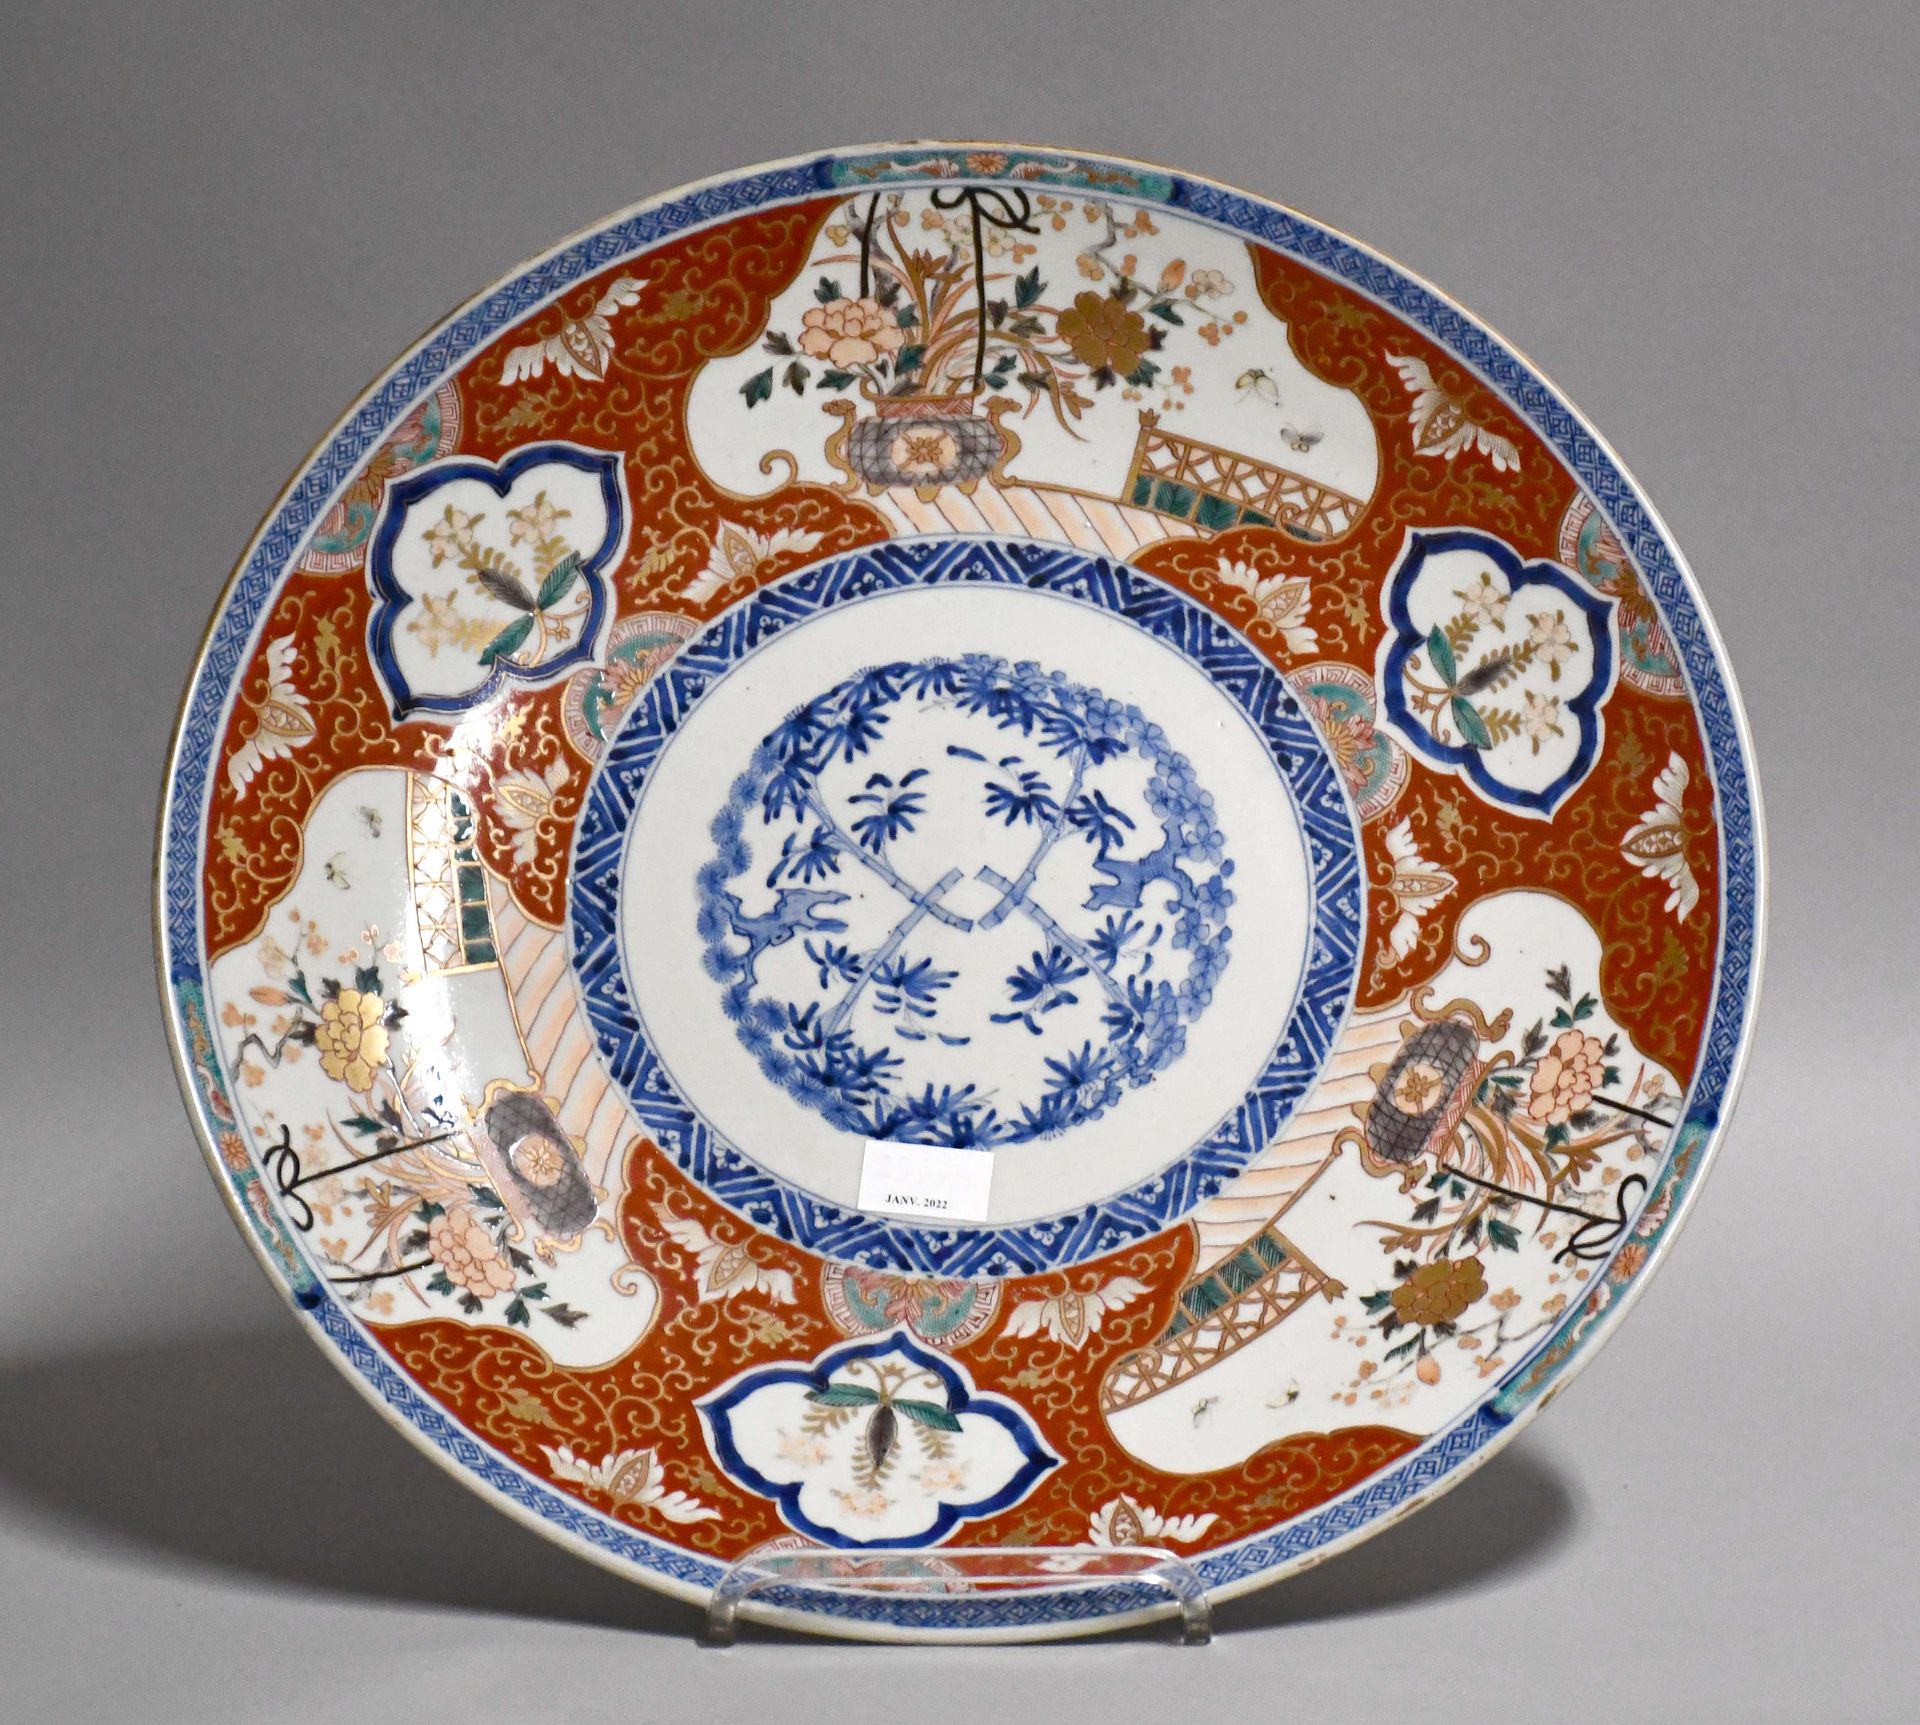 Null Japan, Imari, 19th century

Round polychrome porcelain dish decorated with &hellip;